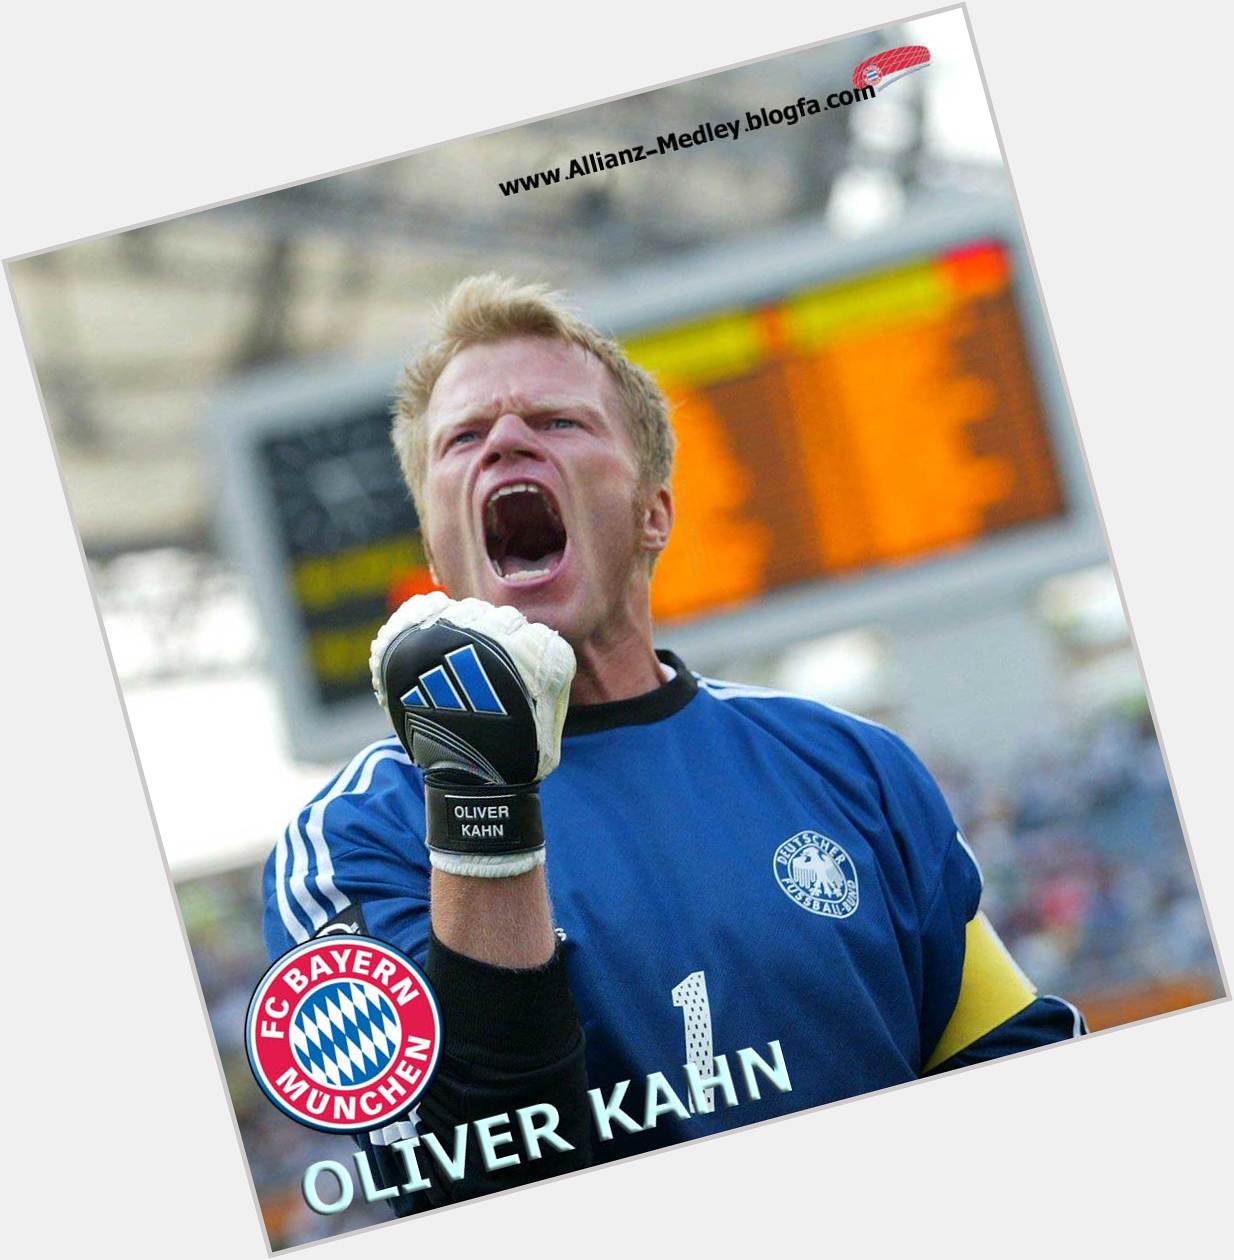 Happy birthday to one of the greatest goalkeepers in football history.
Oliver Kahn turns 46 today 